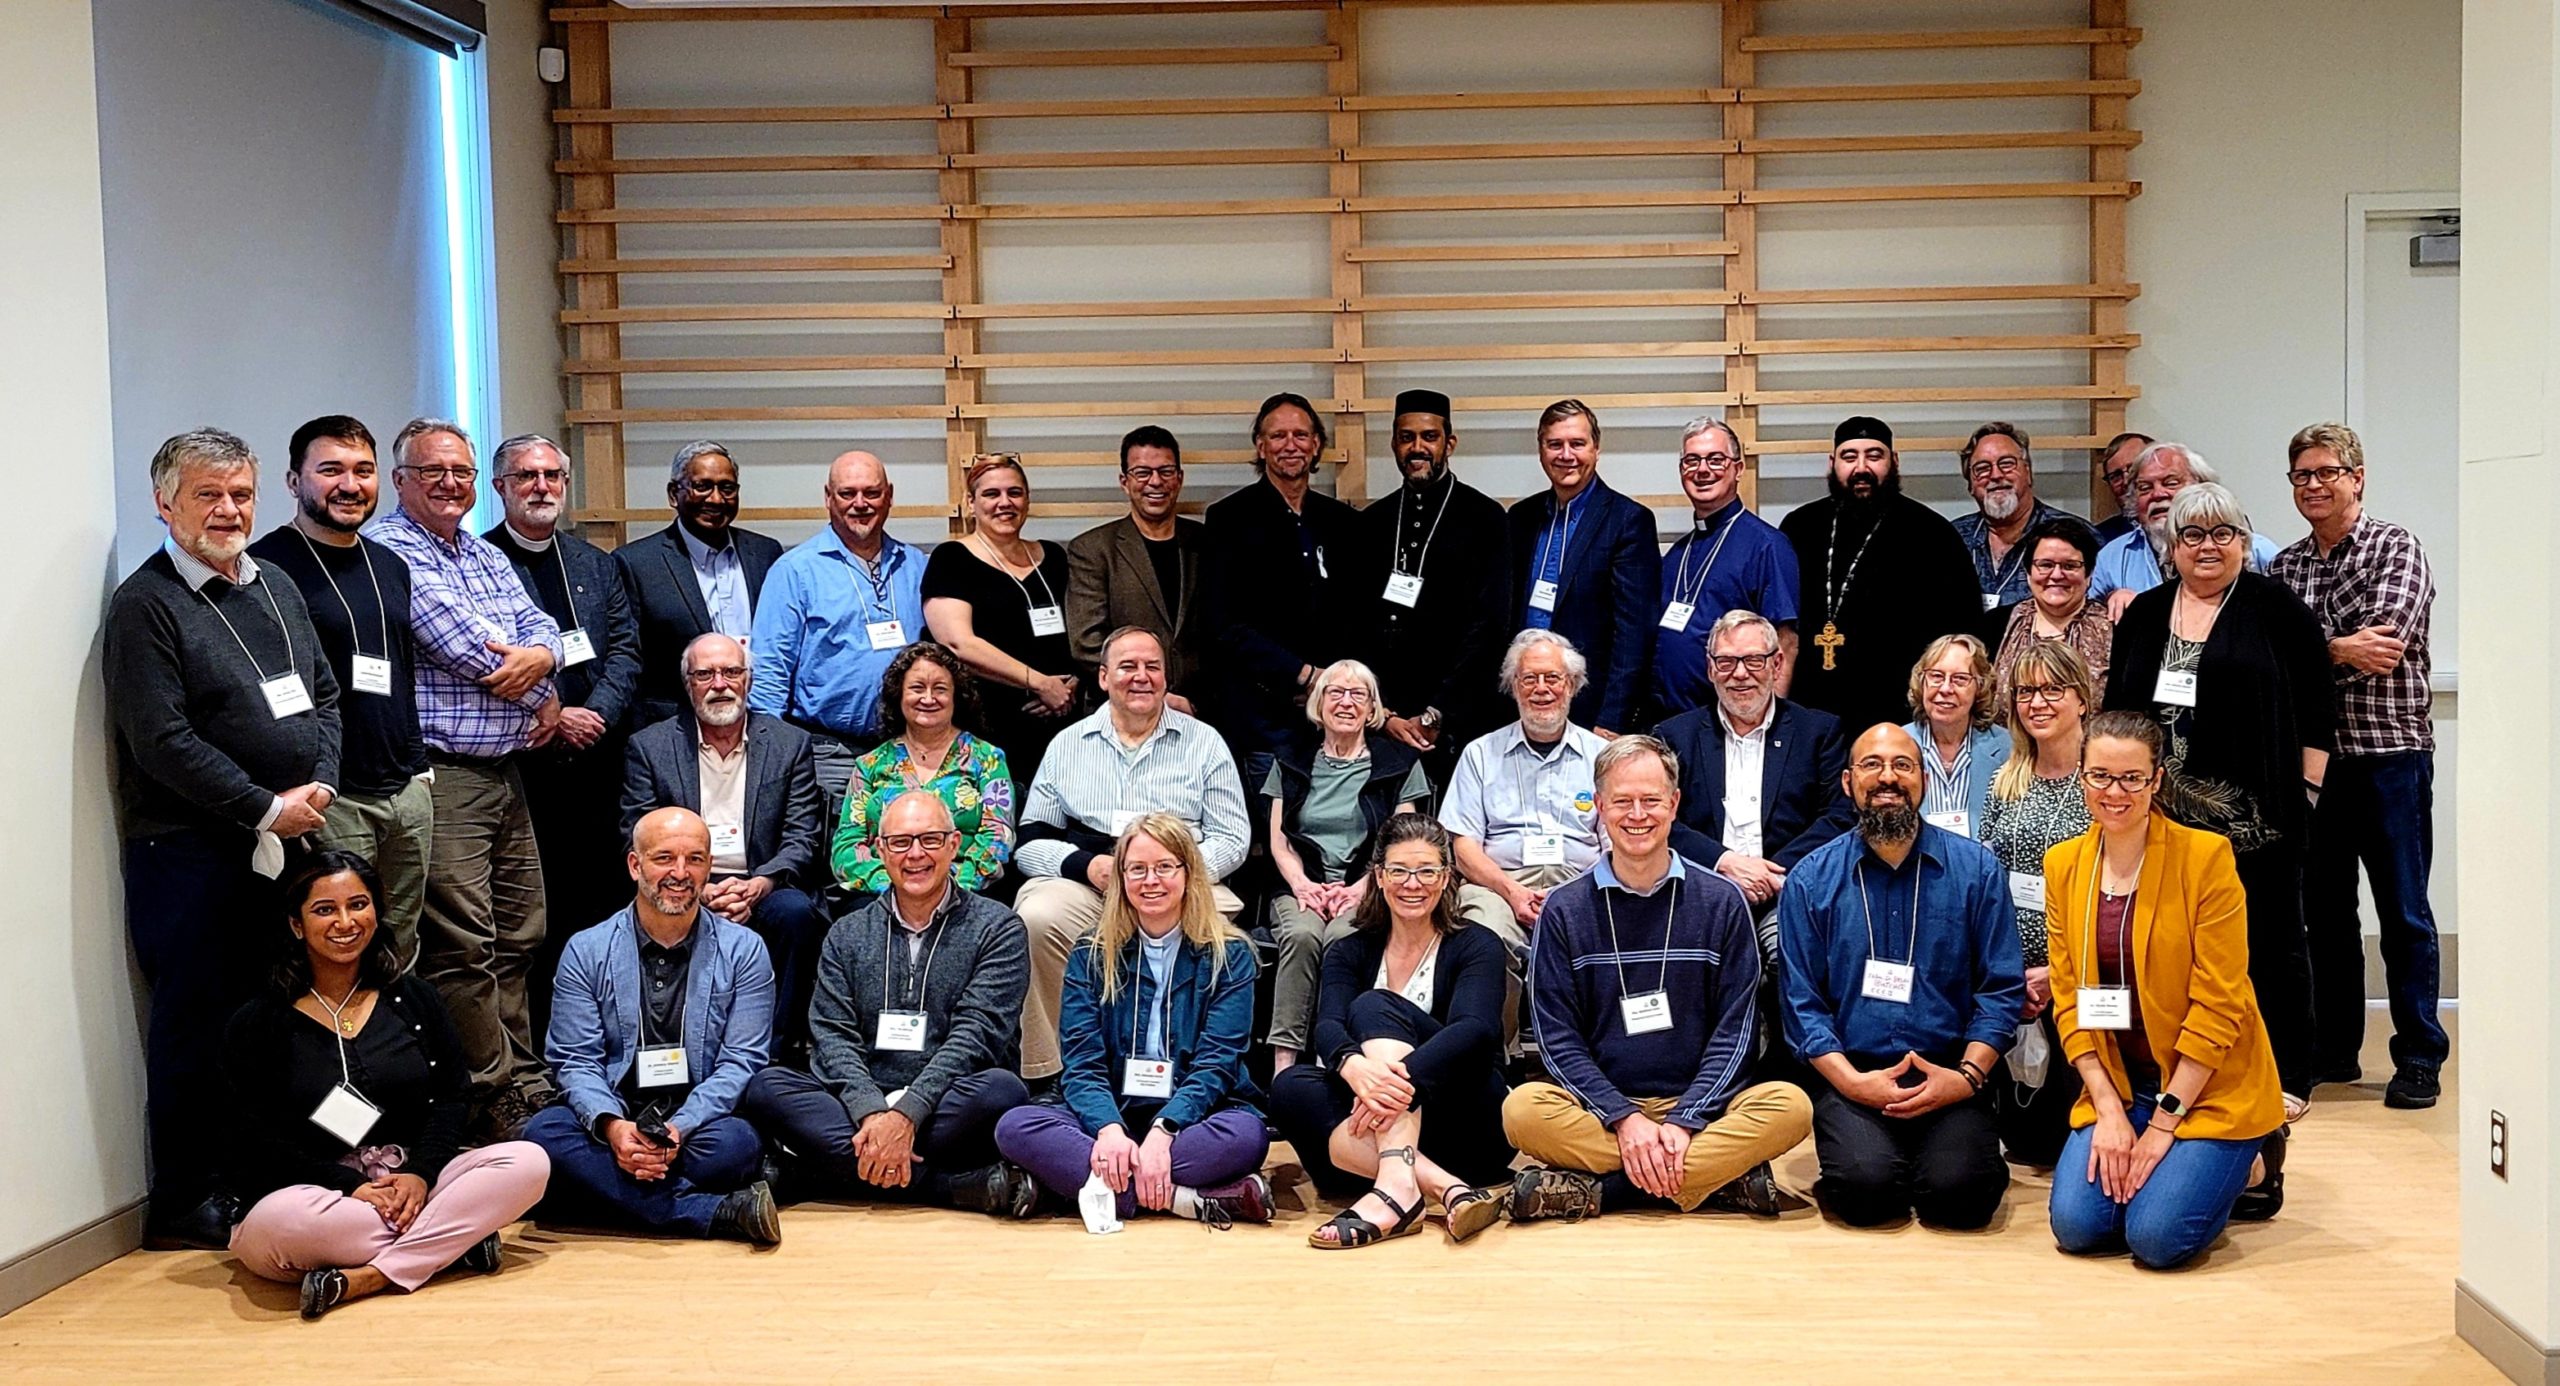 Attendees of the May 2022 Governing Board meeting (May 20, 2022). (Photo credit: The Canadian Council of Churches | Emma Ceruti)